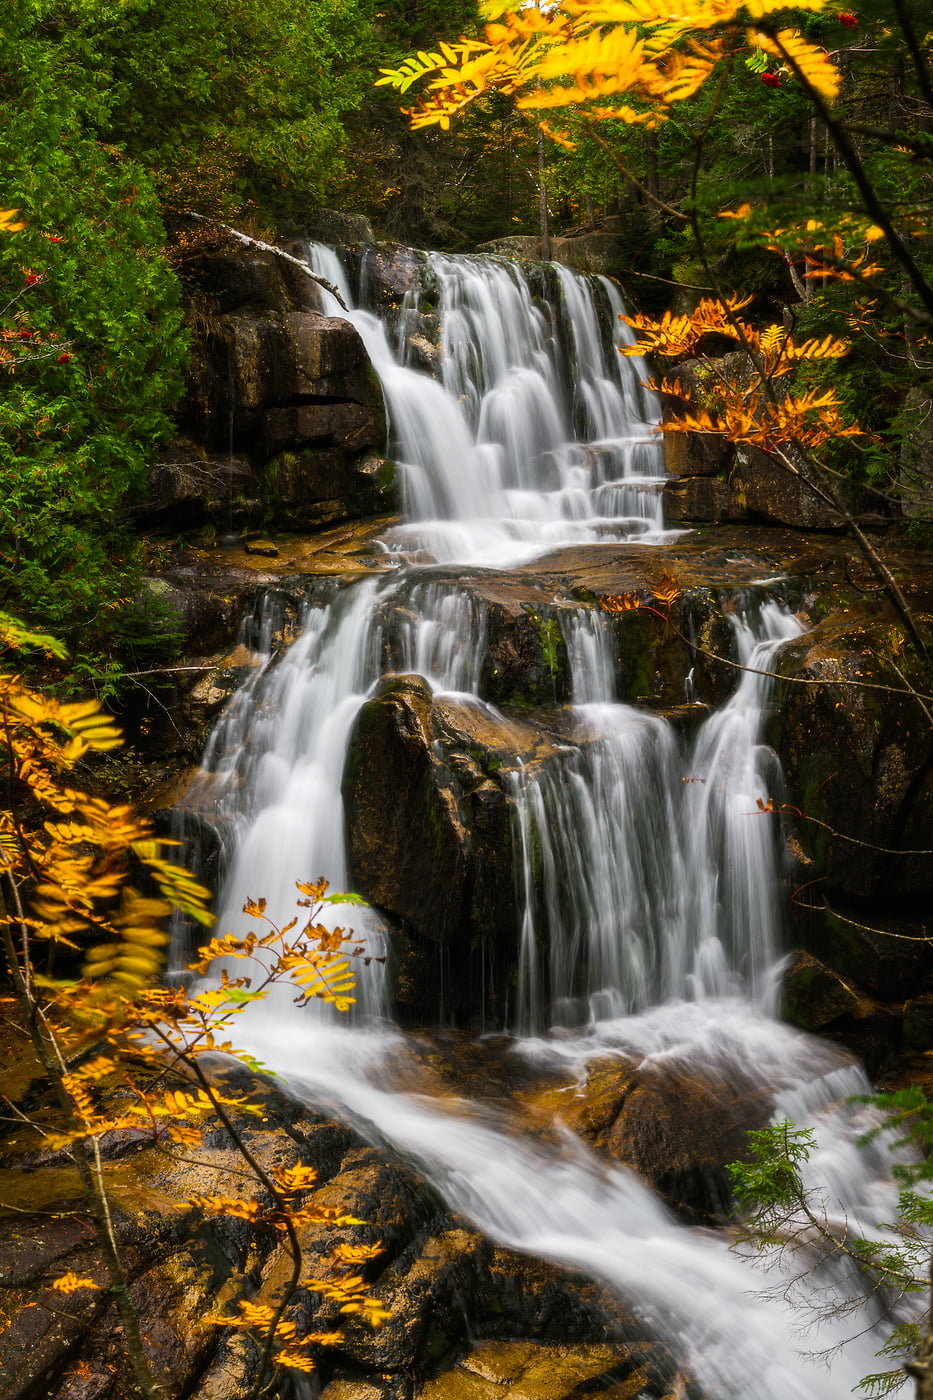 155 megapixels! A very high resolution, large-format photo of a New England waterfall with fall foliage; fine art nature photograph created by Aaron Priest at Katahdin Stream Falls on the Hunt Trail in Baxter State Park, Maine.